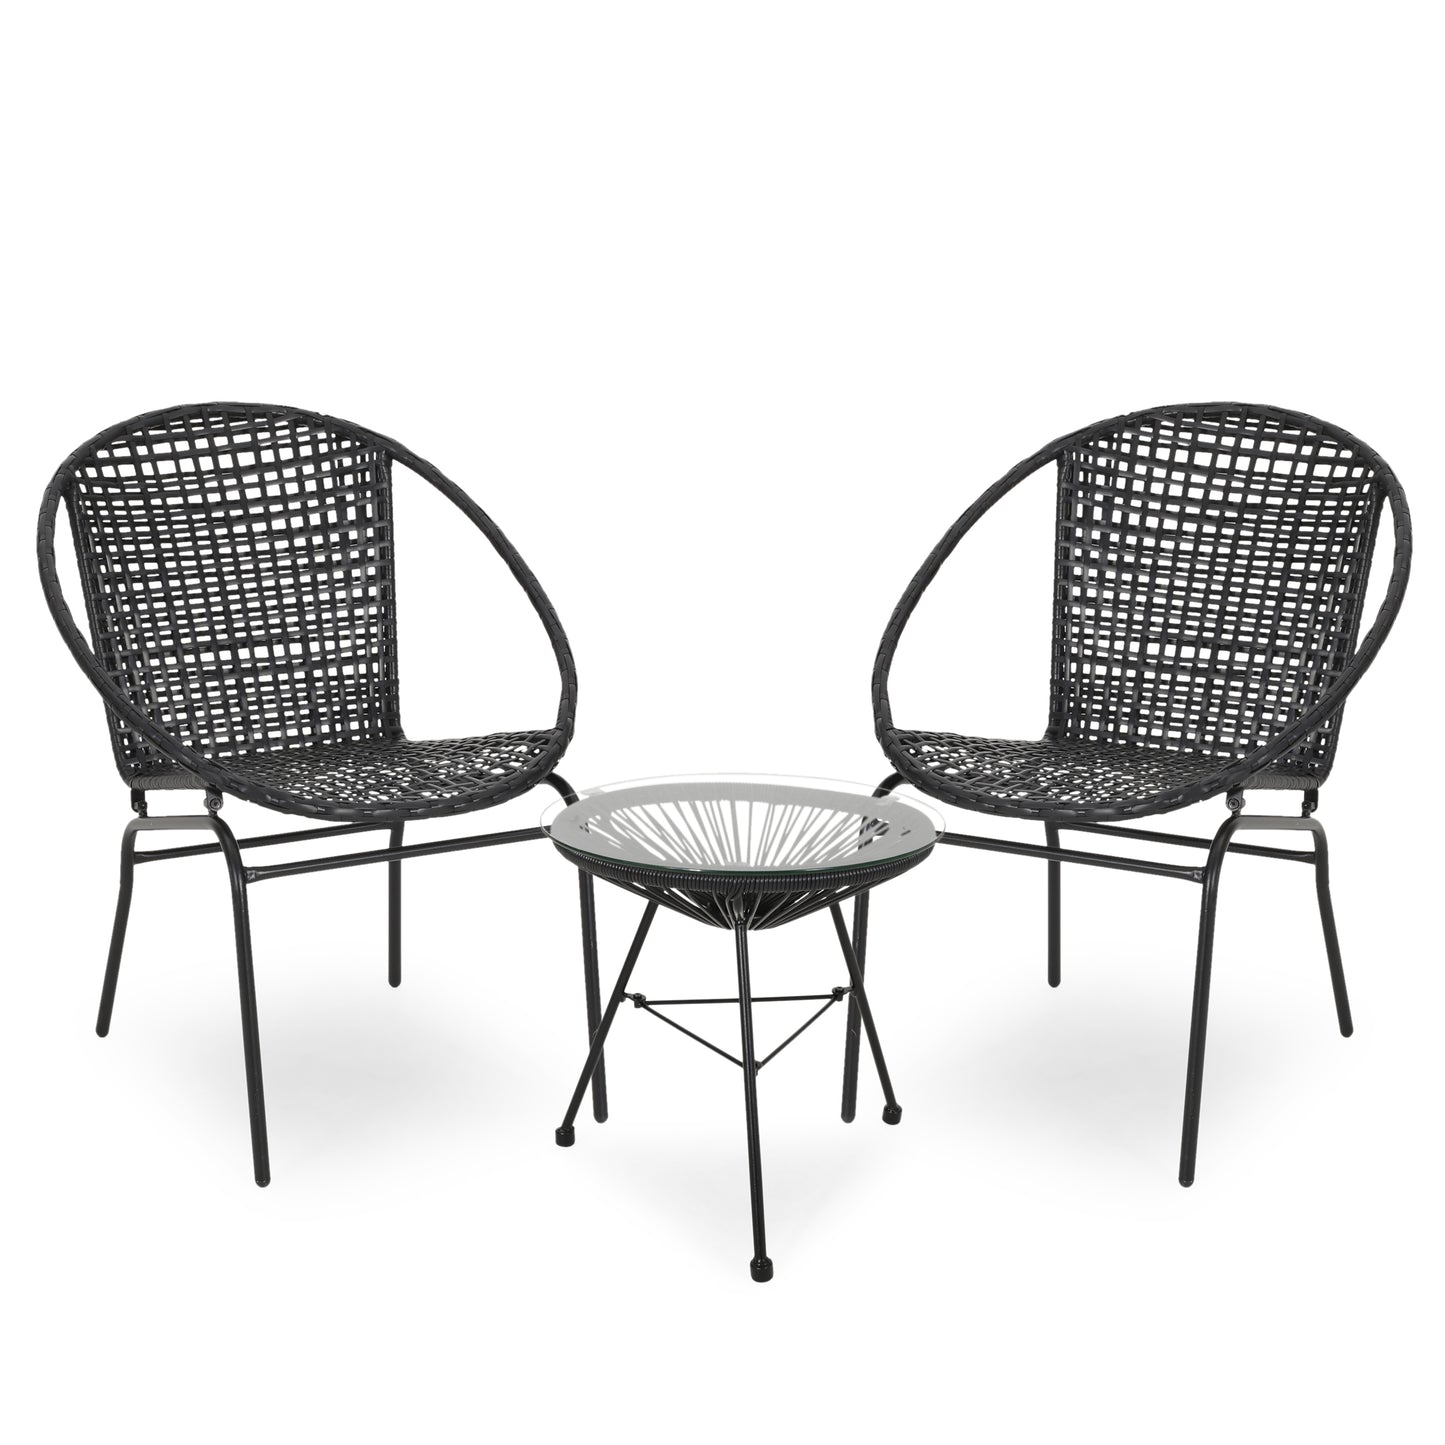 German Outdoor Modern 2 Seater Faux Rattan Chat Set